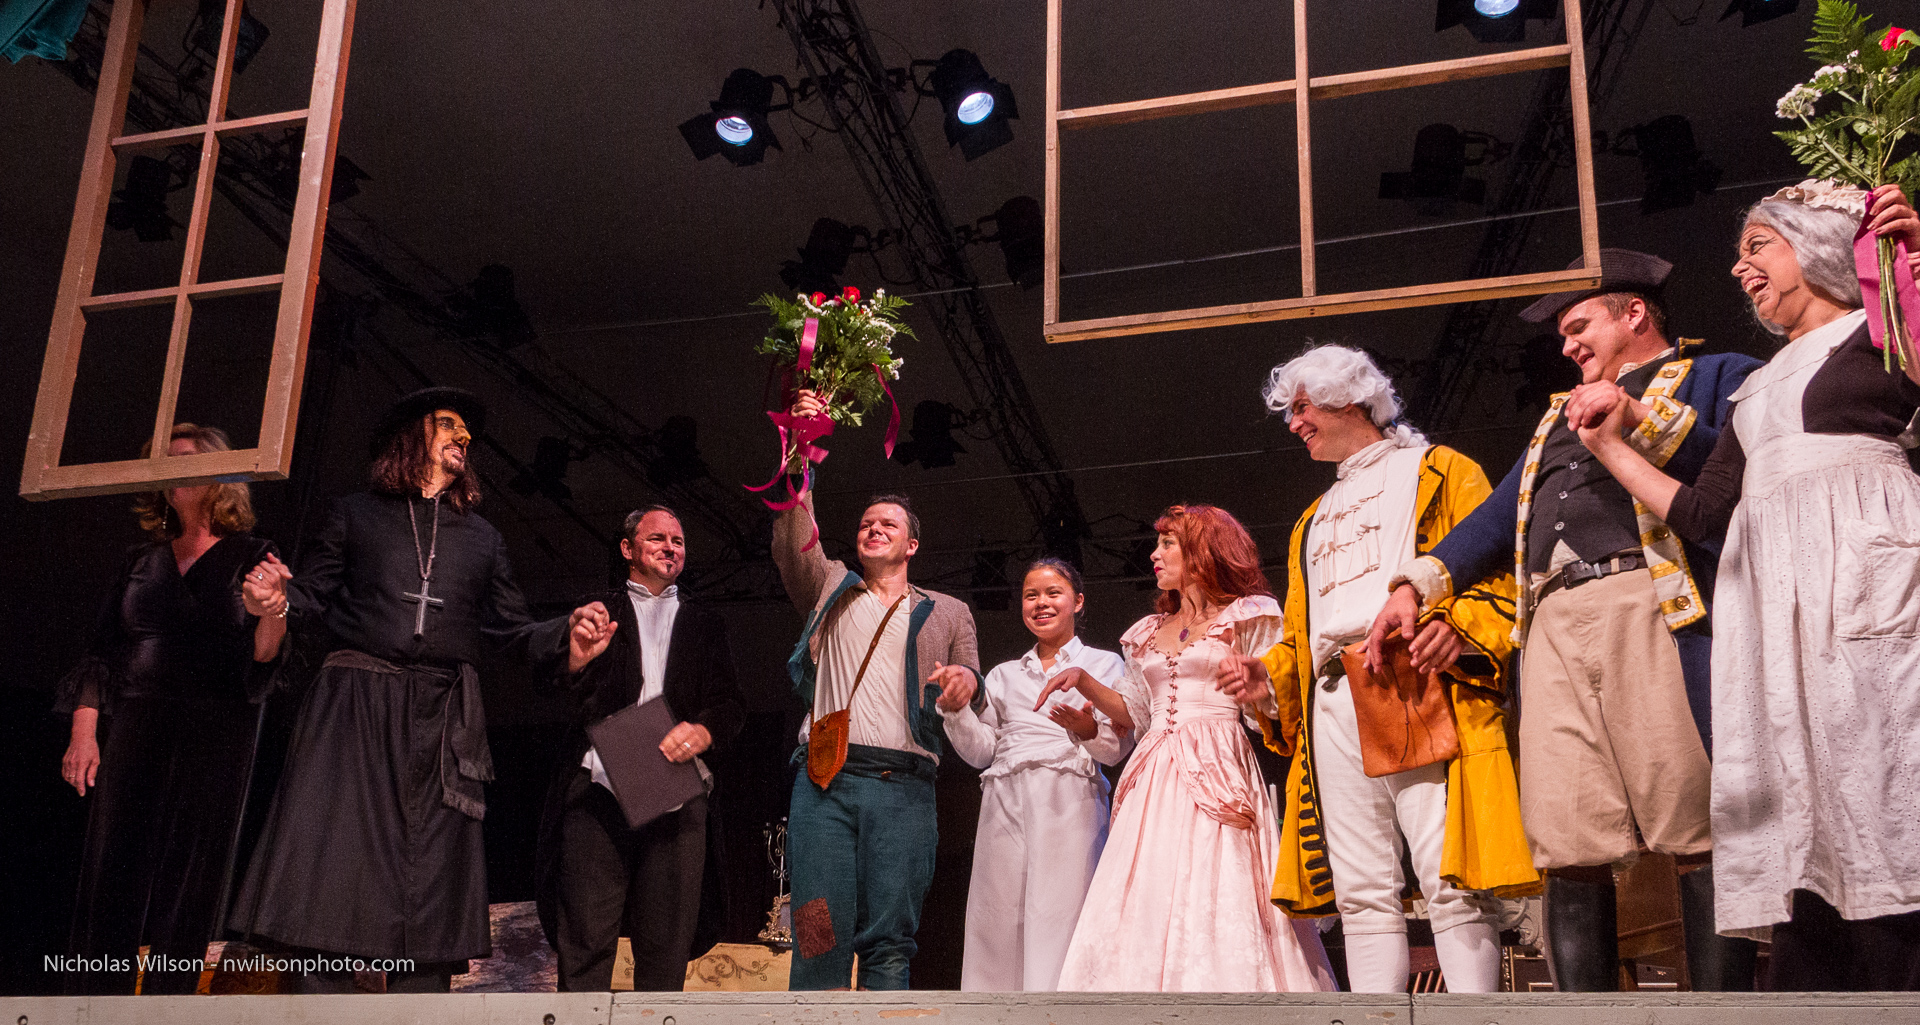 Final bow, with flowers, for The Barber of Seville.